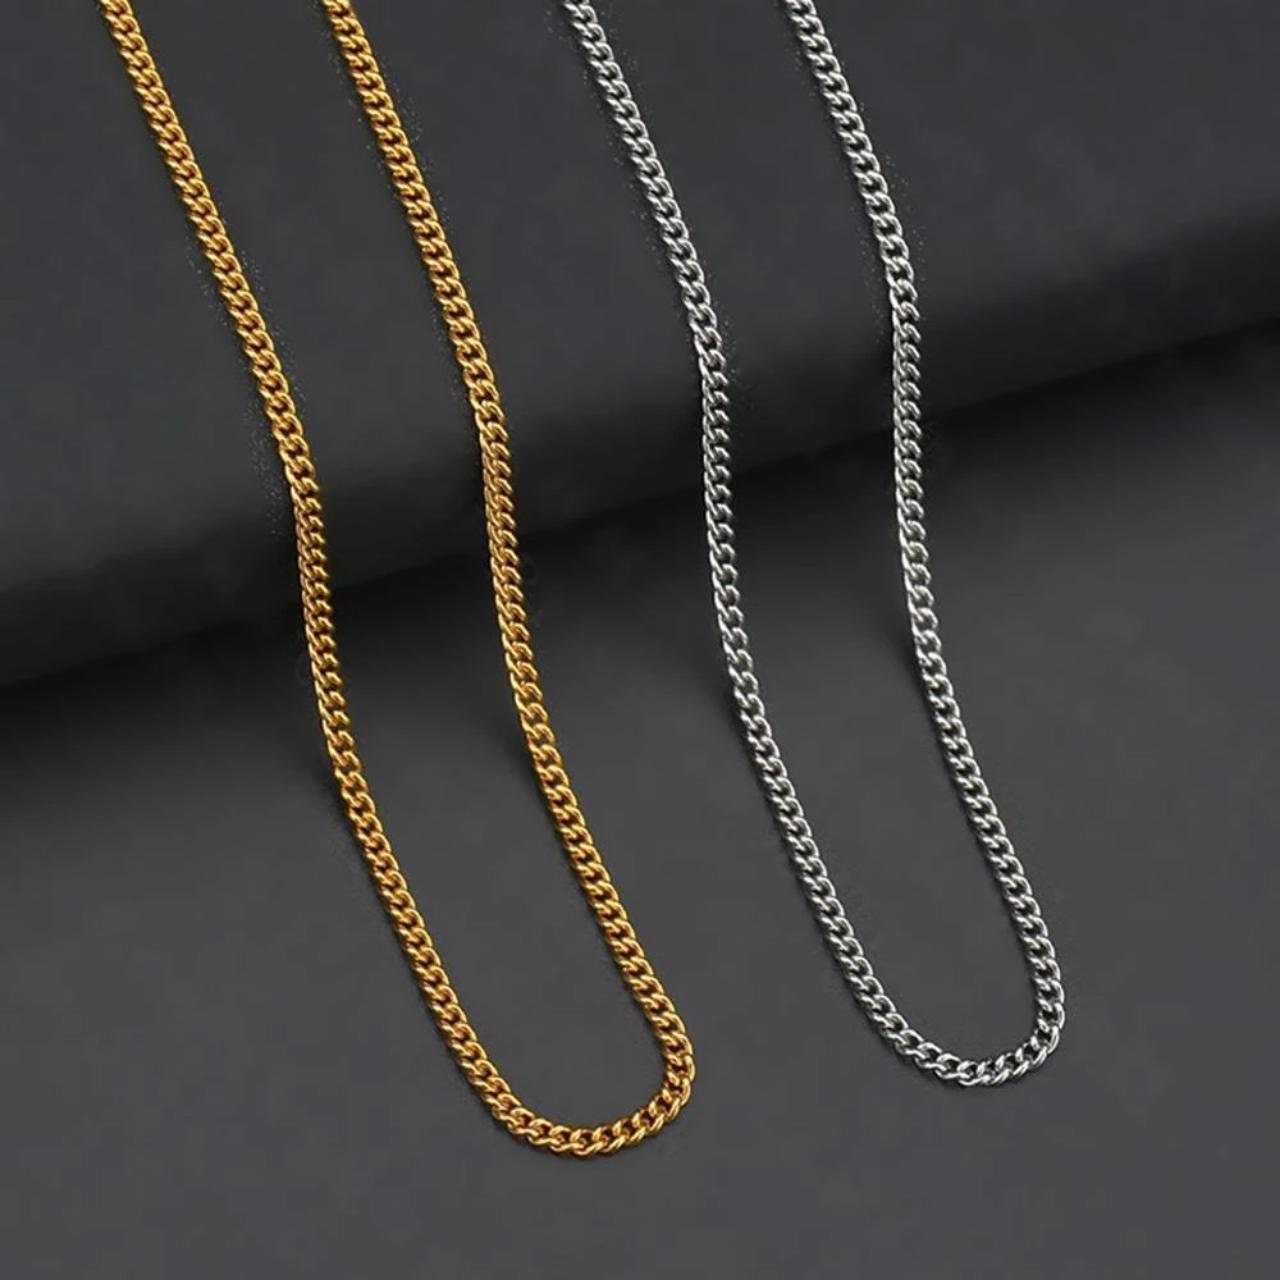 CRW Lock Necklace with 1.8mm curb link chain in gold - Latch Necklace for Women - Key Necklace for Men - Necklace with Hip Hop Pendant